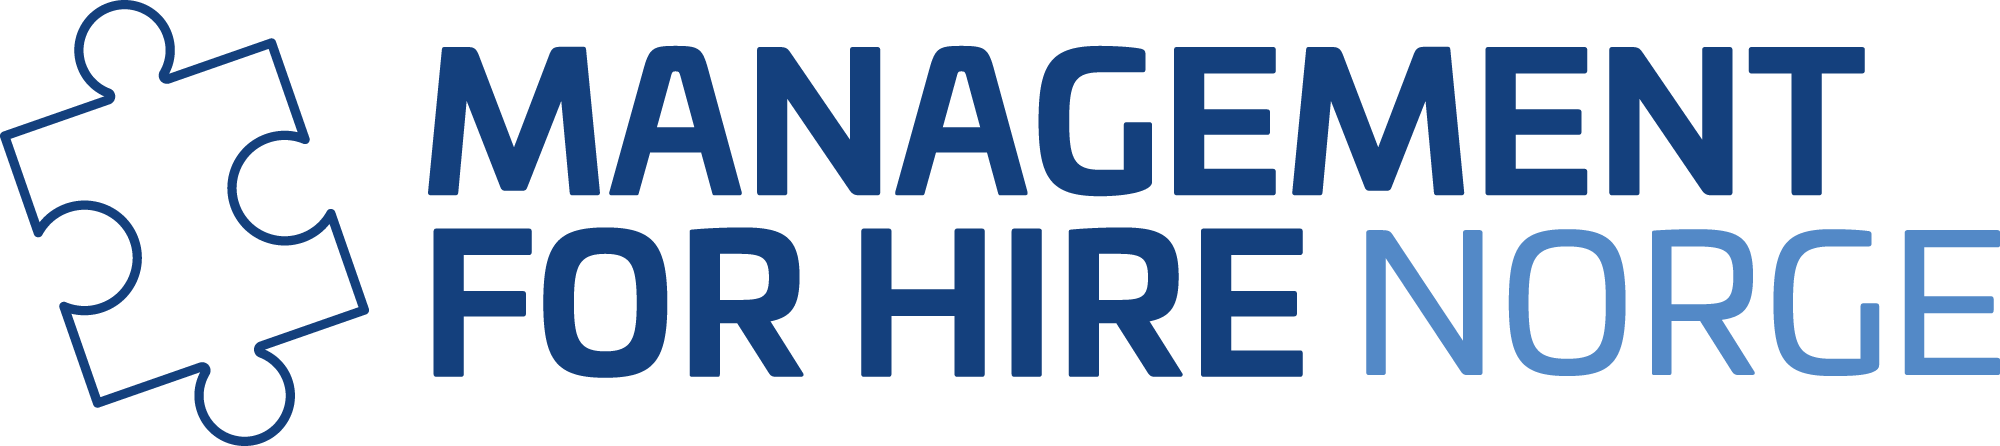 Management for Hire Norge AS